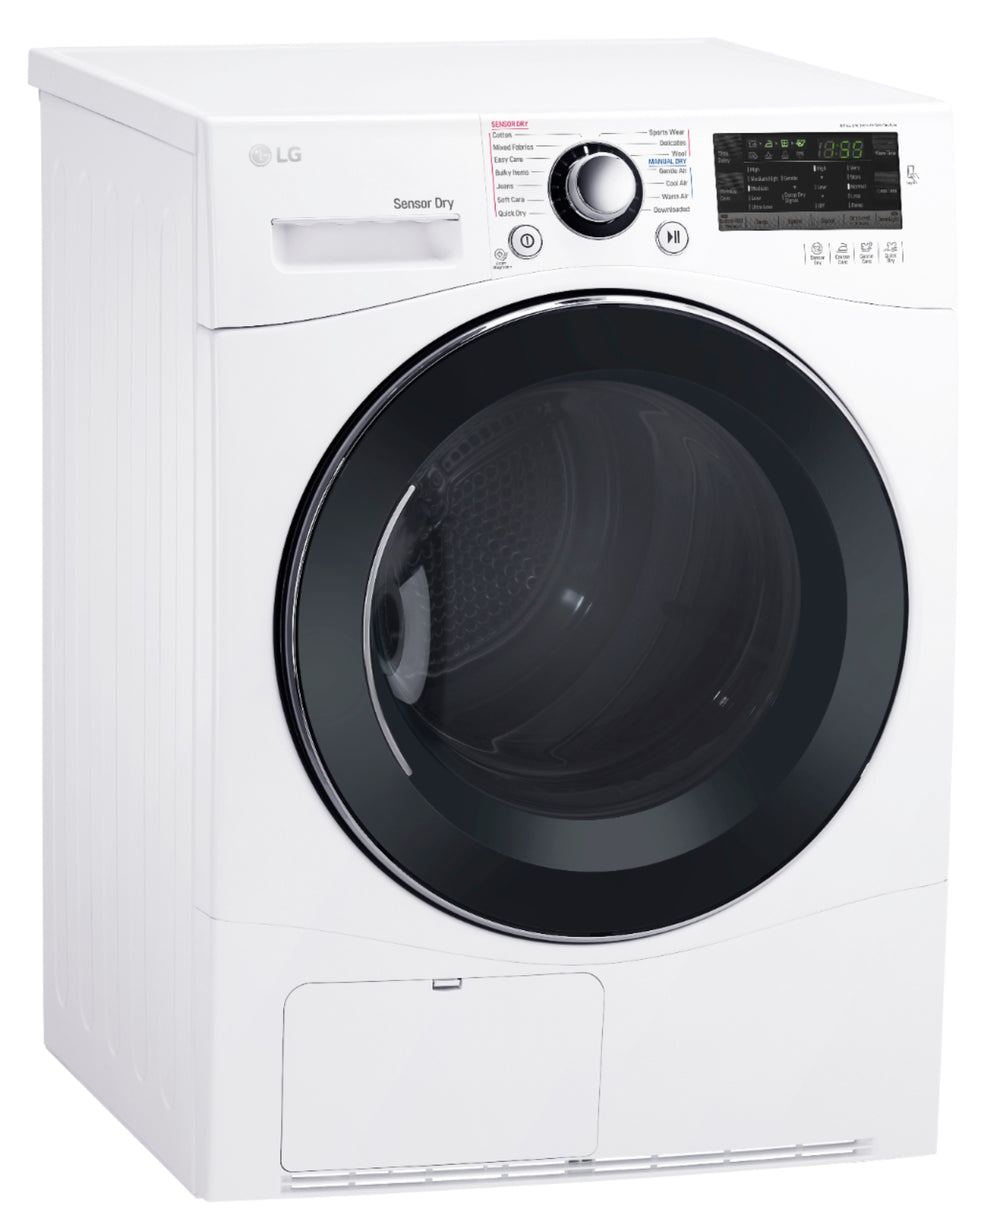 LG - 4.2 Cu. Ft. Electric Dryer with Sensor Dry - White_1